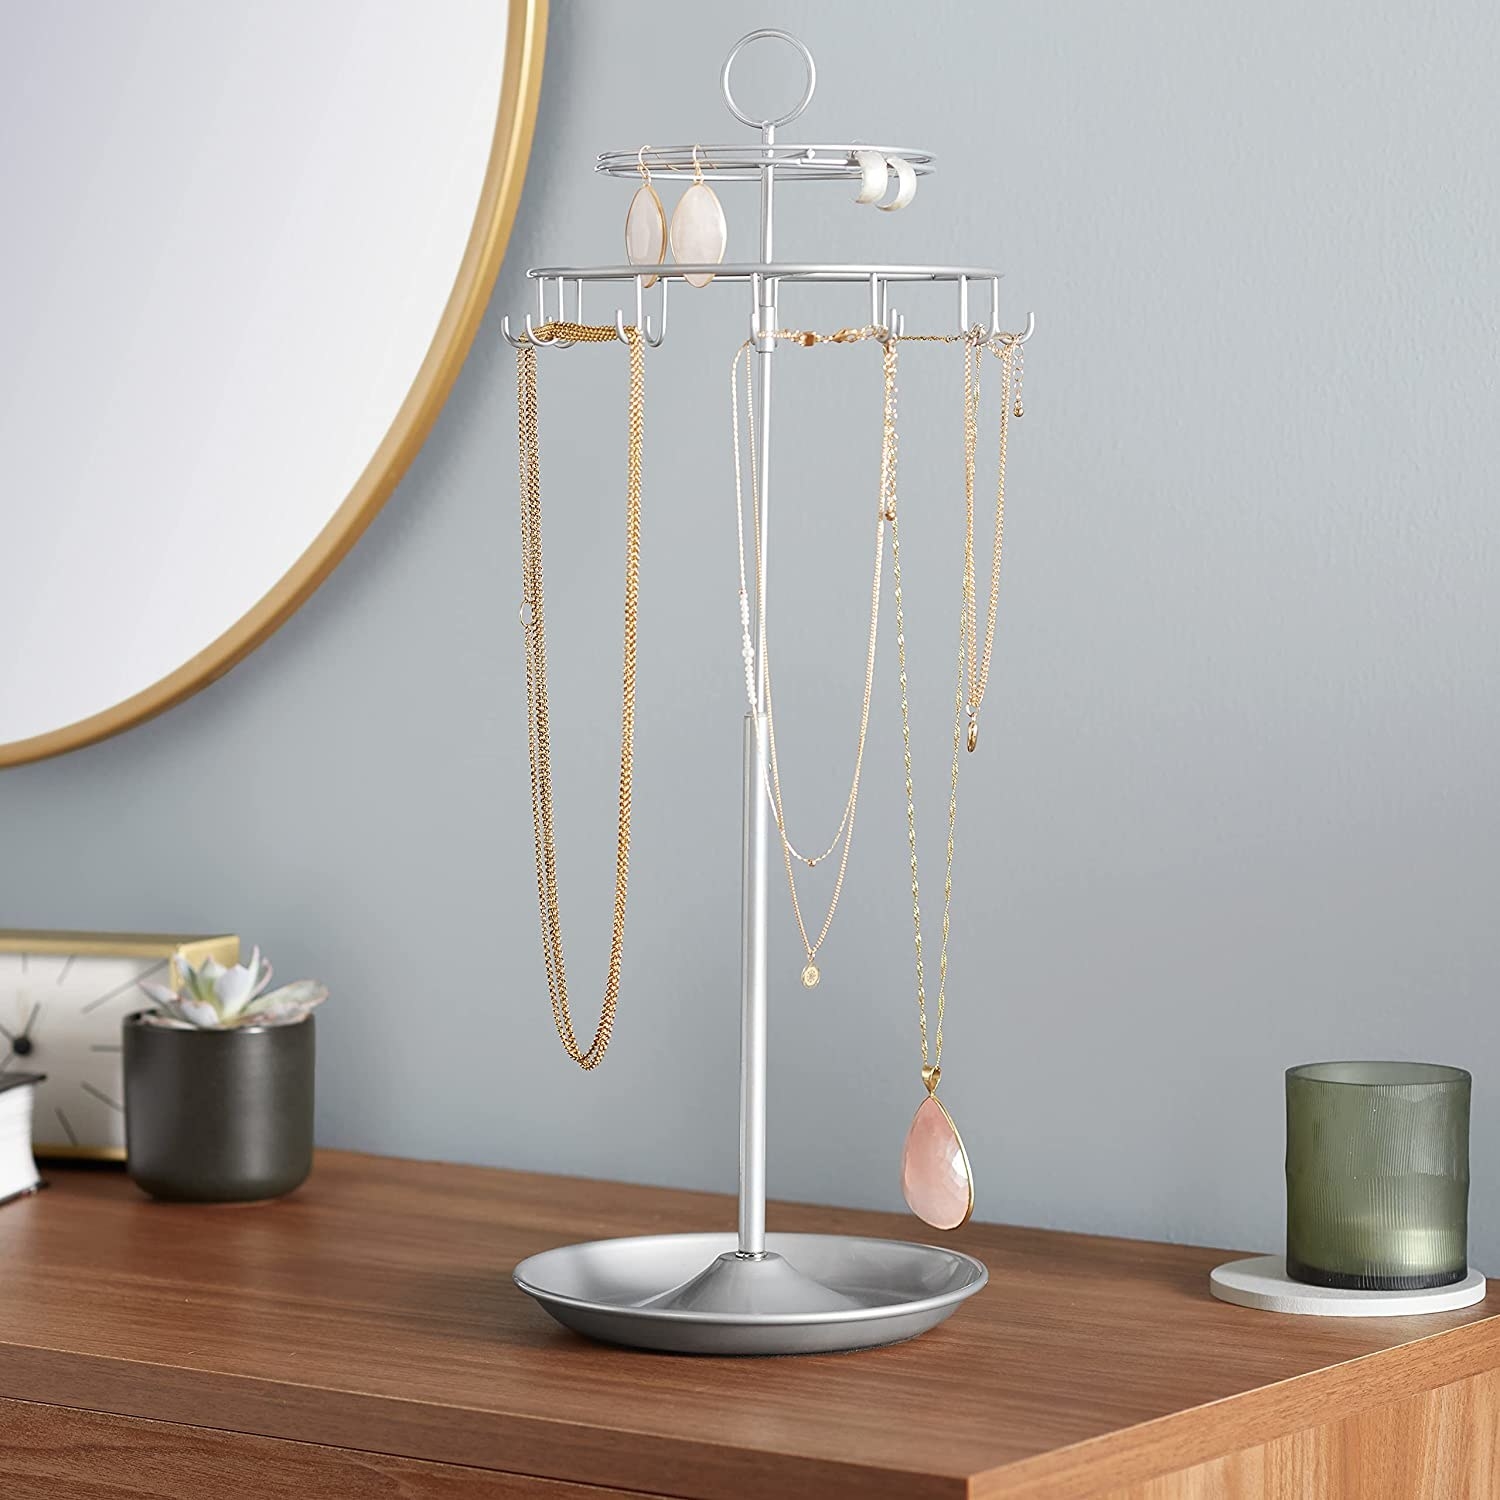 the jewellery carousel on a side table